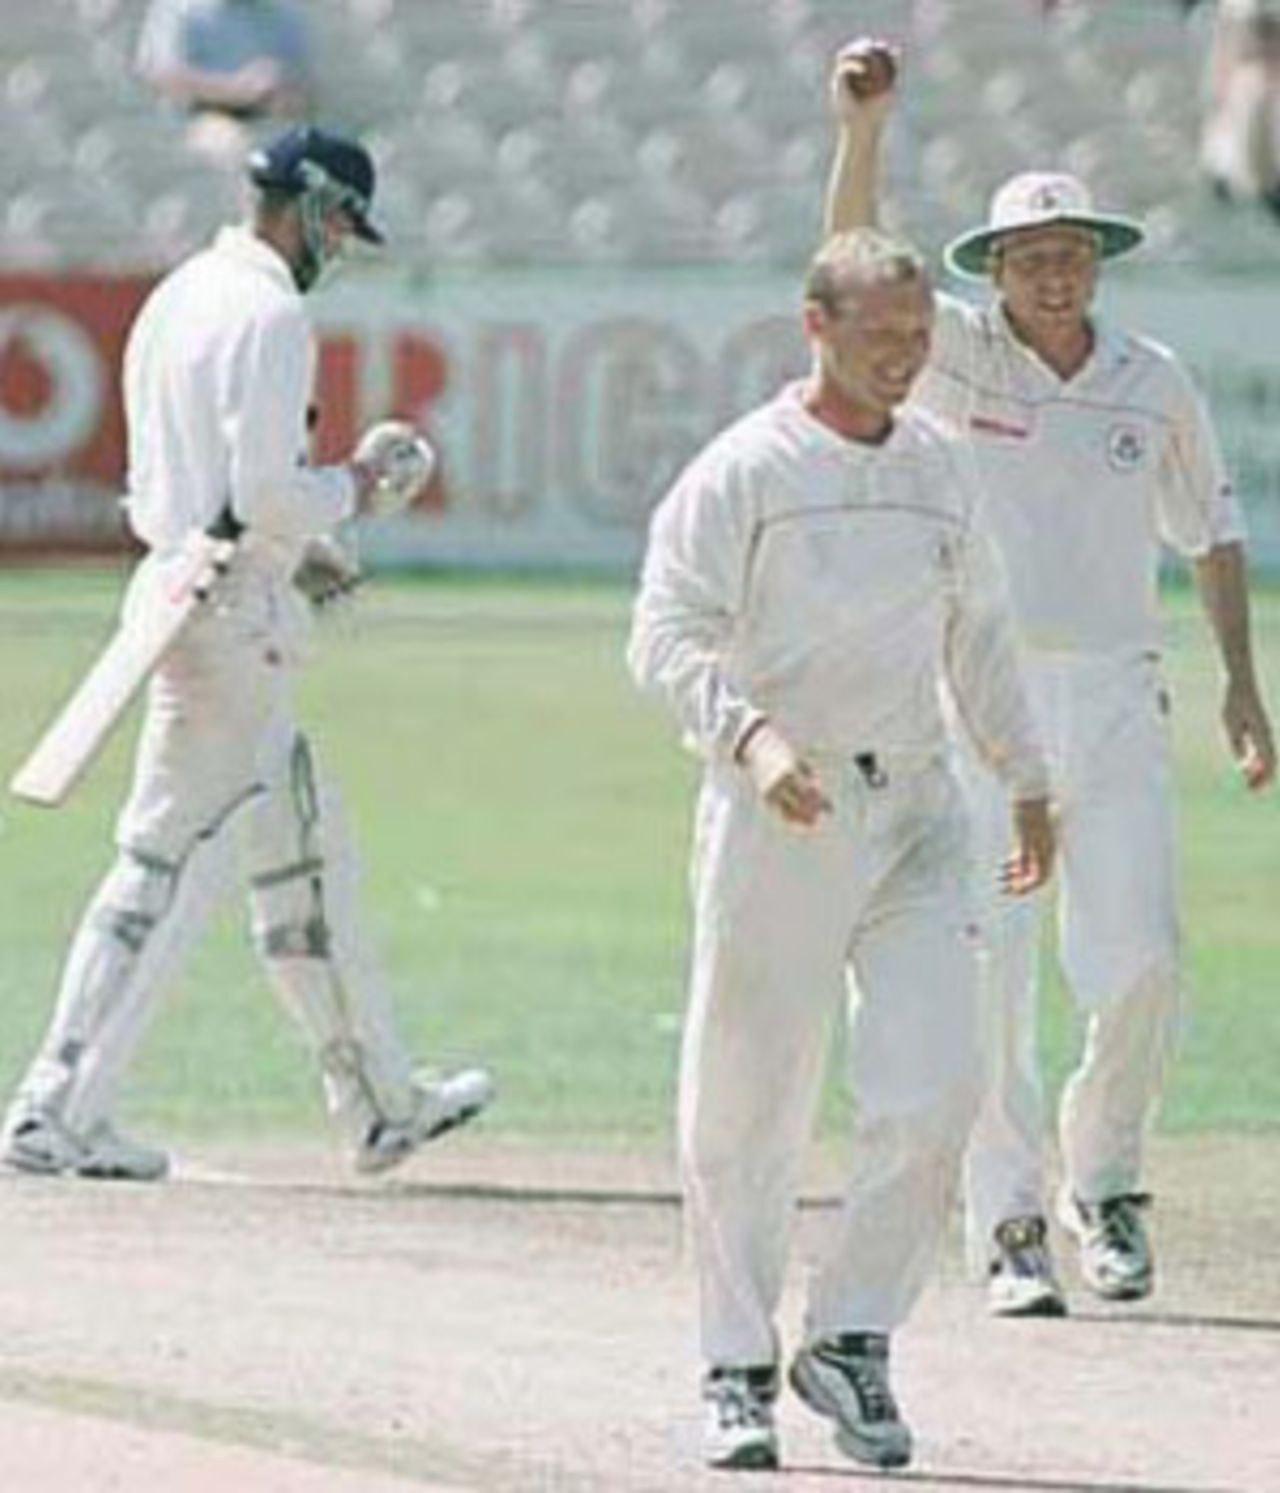 Brown departs after being caught by Atherton off Keedy, PPP healthcare County Championship Division One, 2000, Lancashire v Durham, Old Trafford, Manchester 19-22 July 2000 (Day 4).